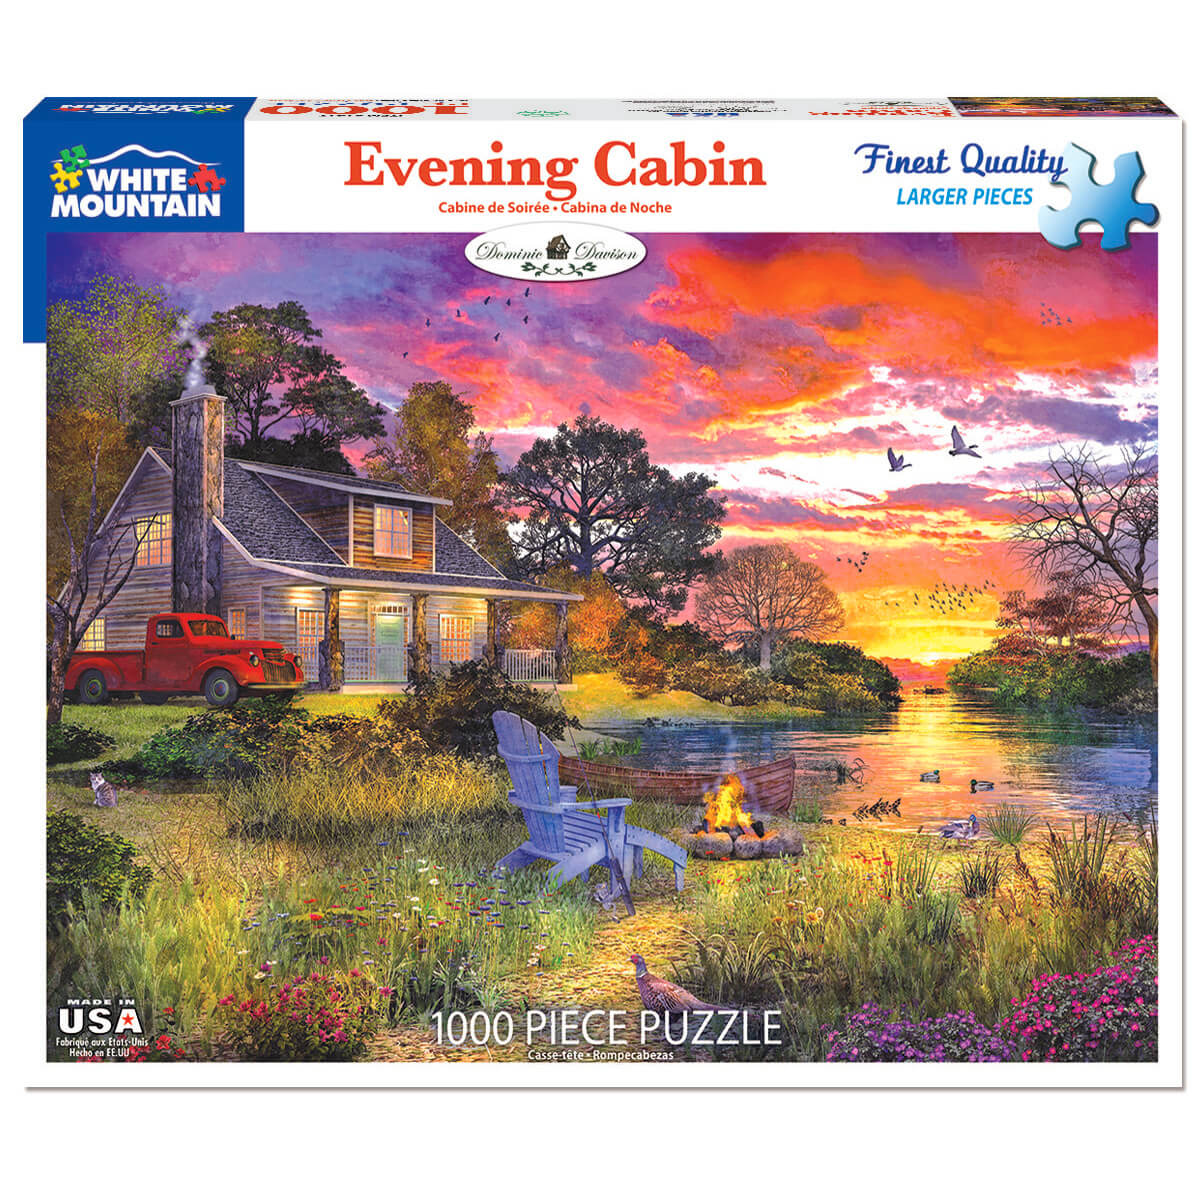 White Mountain Puzzles Evening Cabin 1000 Piece Jigsaw Puzzle